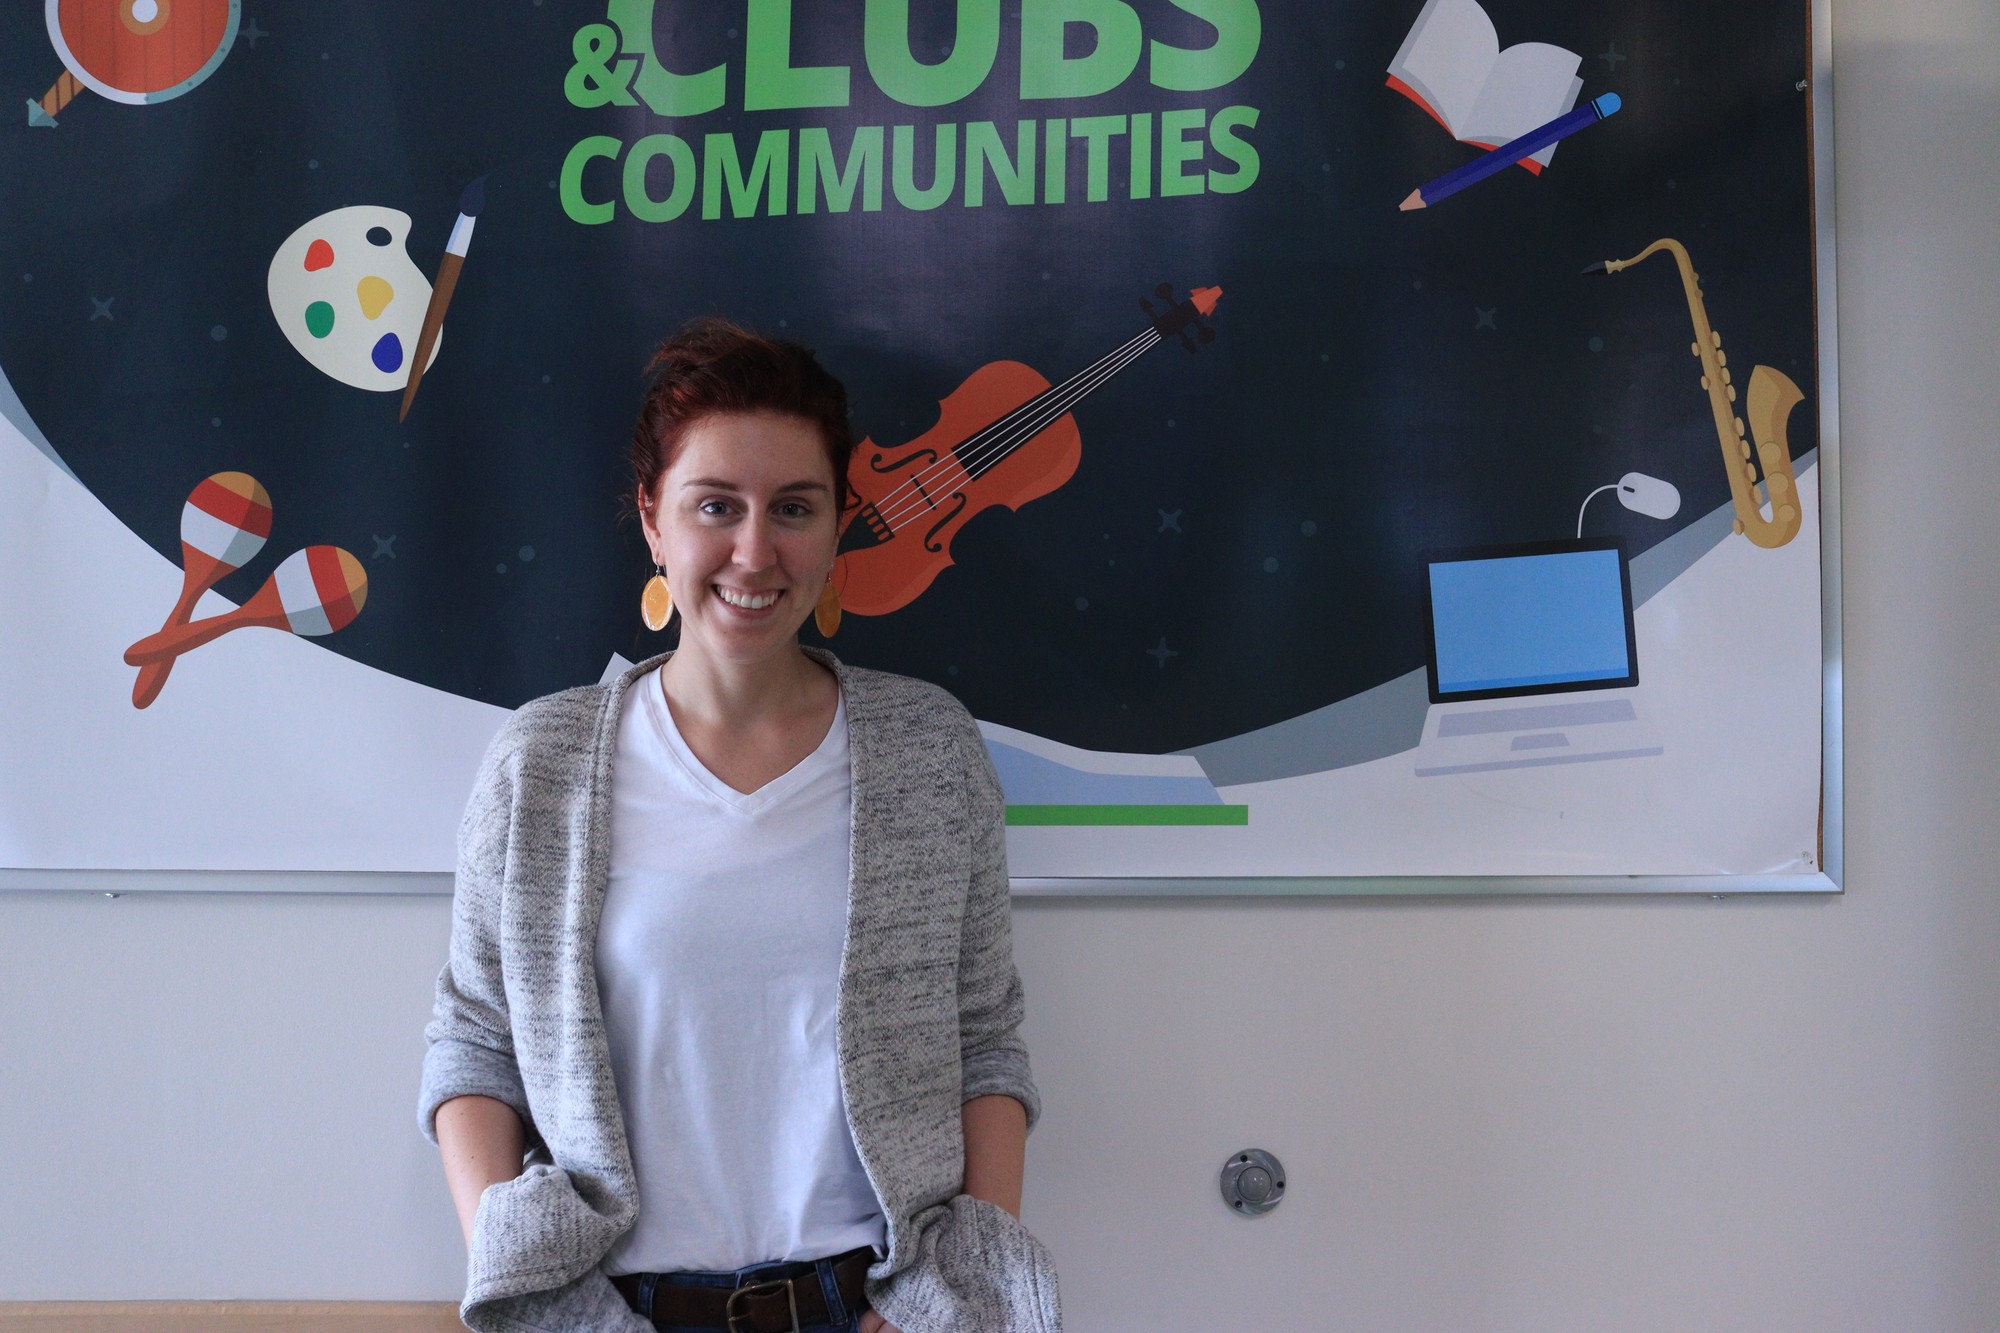 Nicole Hall, Clubs and Communities Coordinator at Algonquin College in Ottawa (located in room E209c).